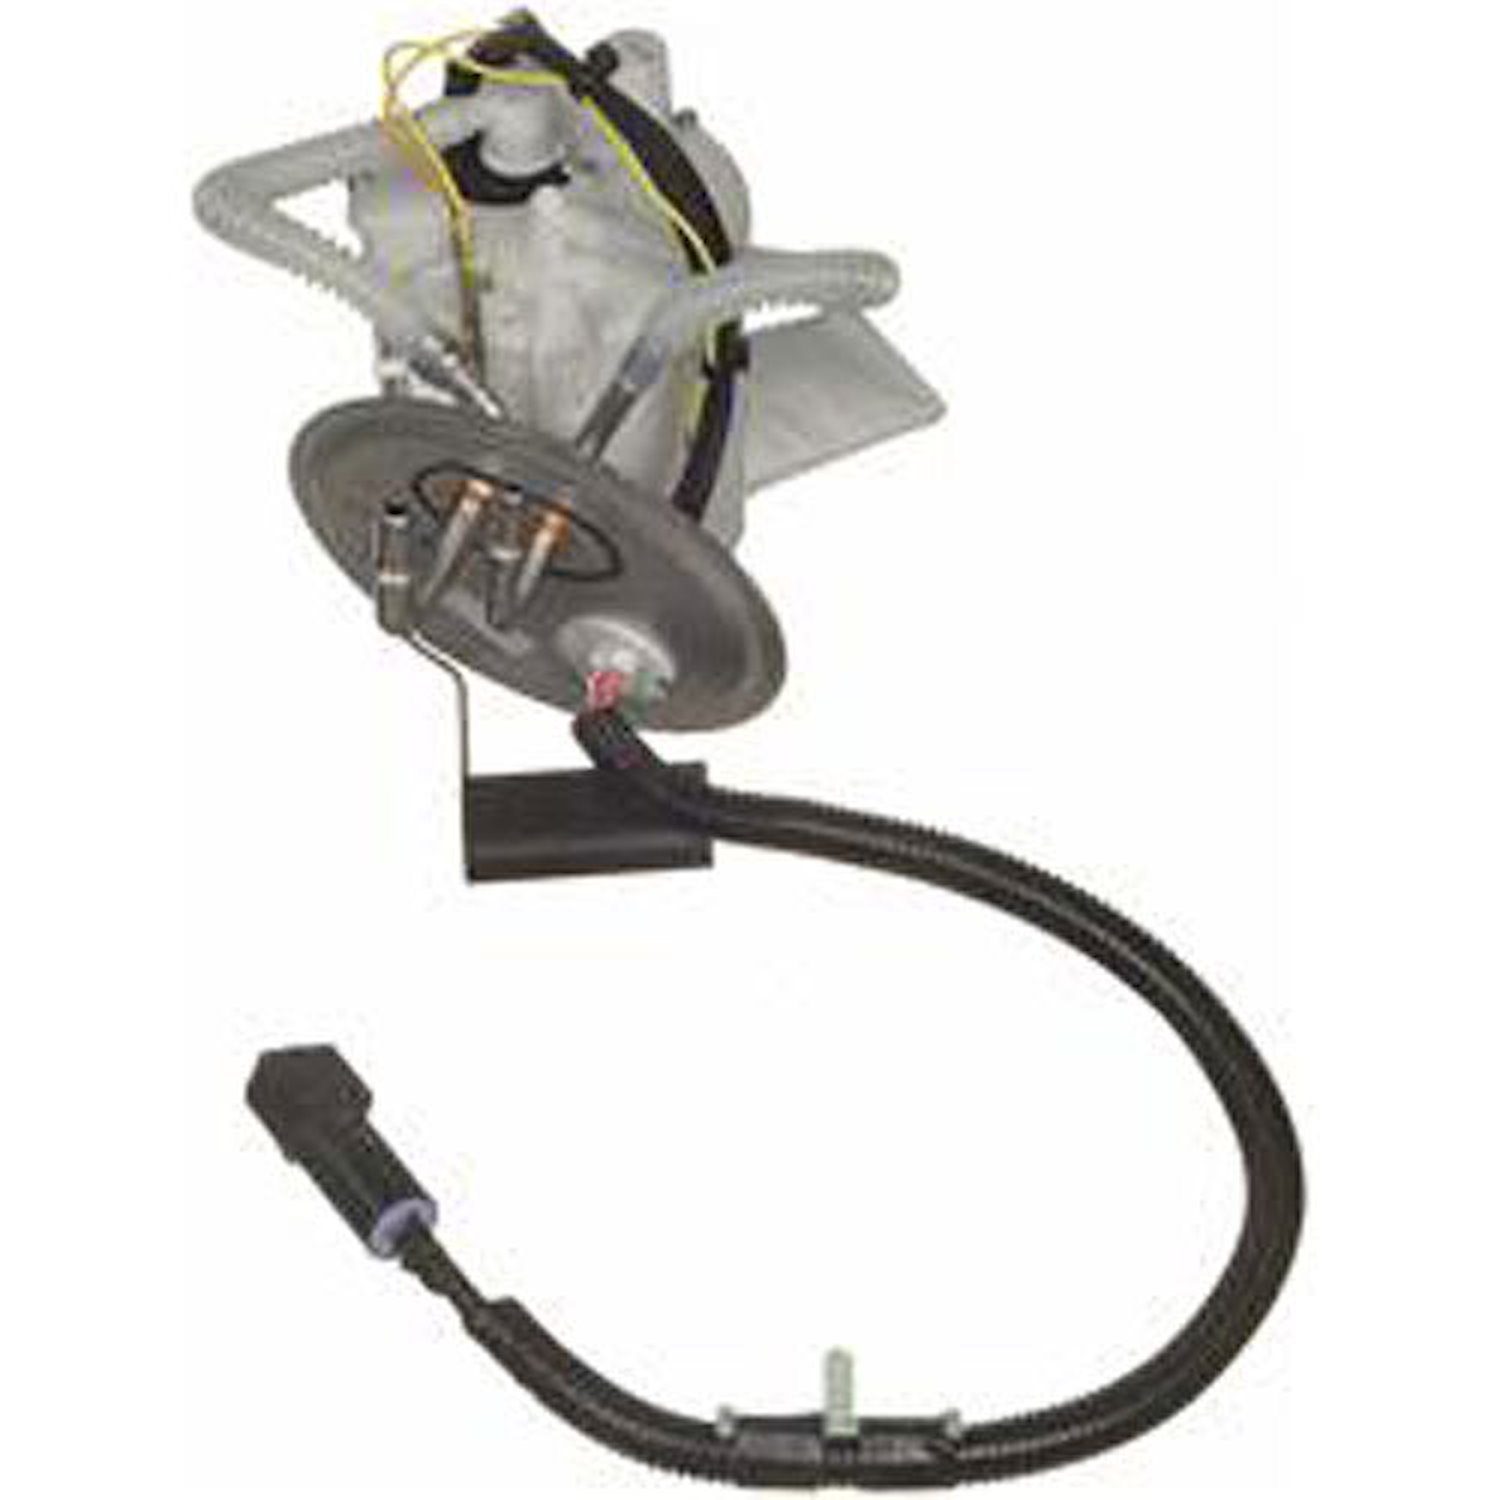 OE Ford/Lincoln Replacement Electric Fuel Pump Module Assembly 1996 Lincoln Continental 4.6L V8